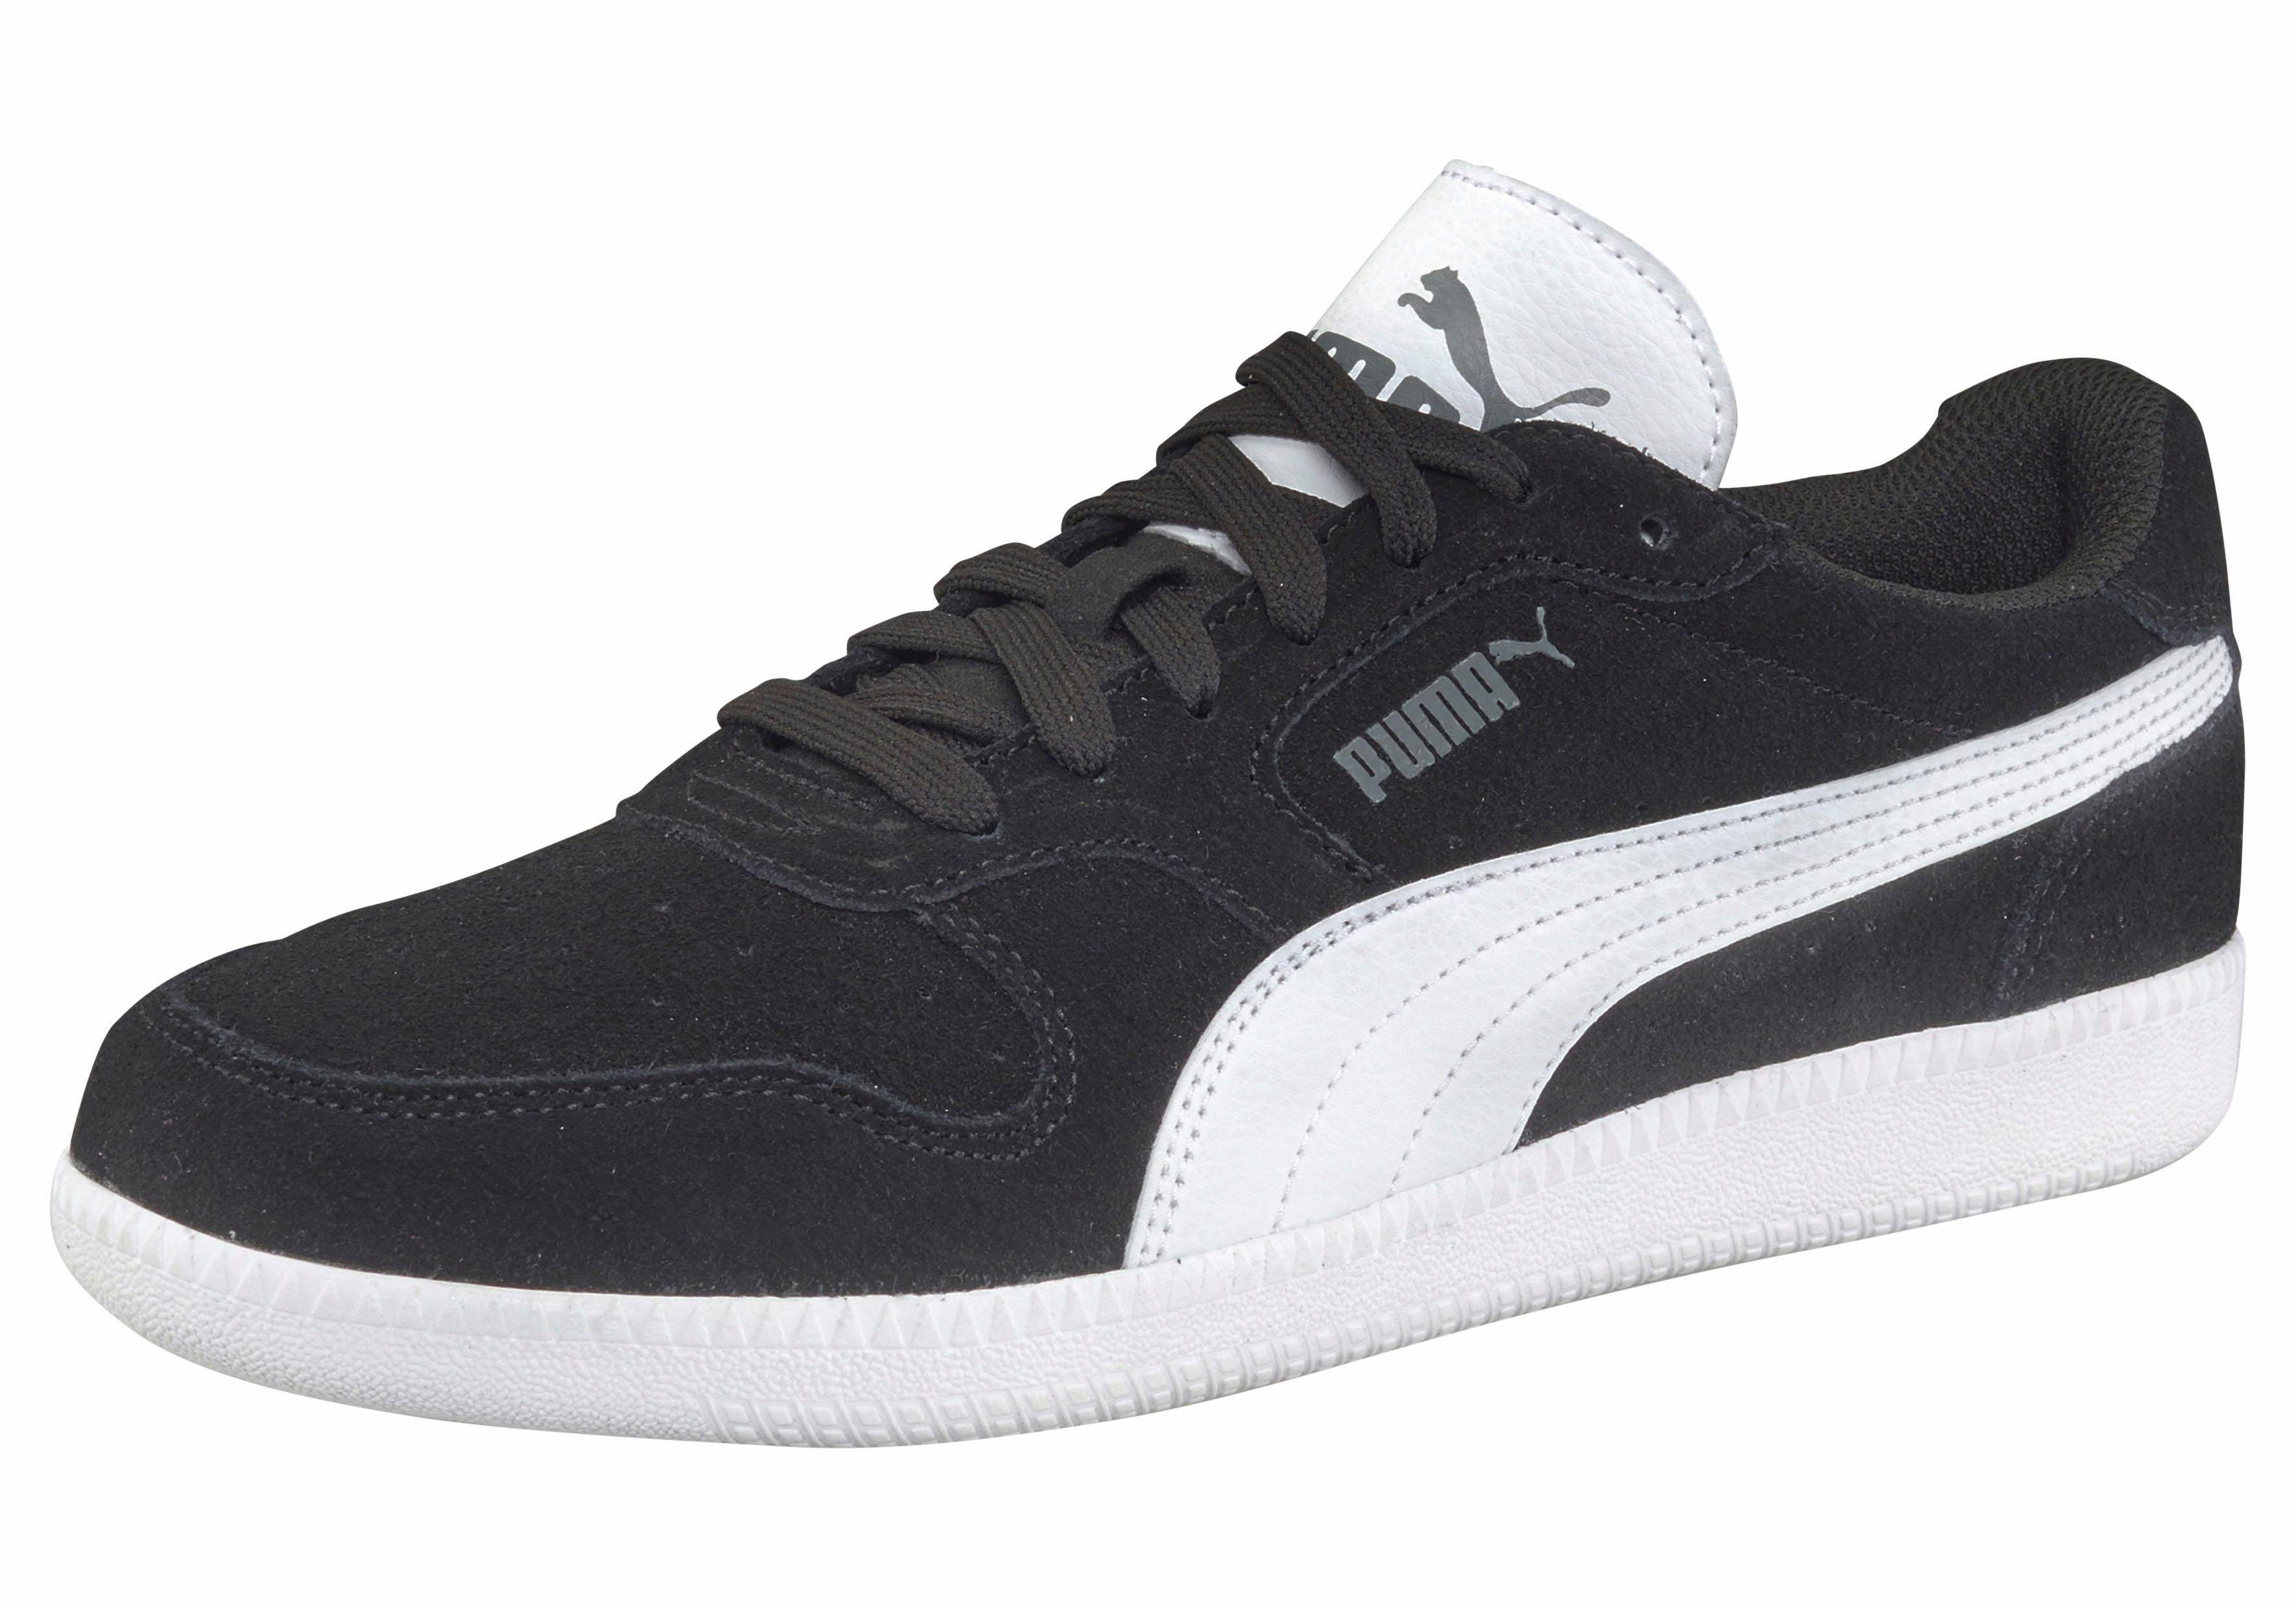 puma icra trainer sd sneakers